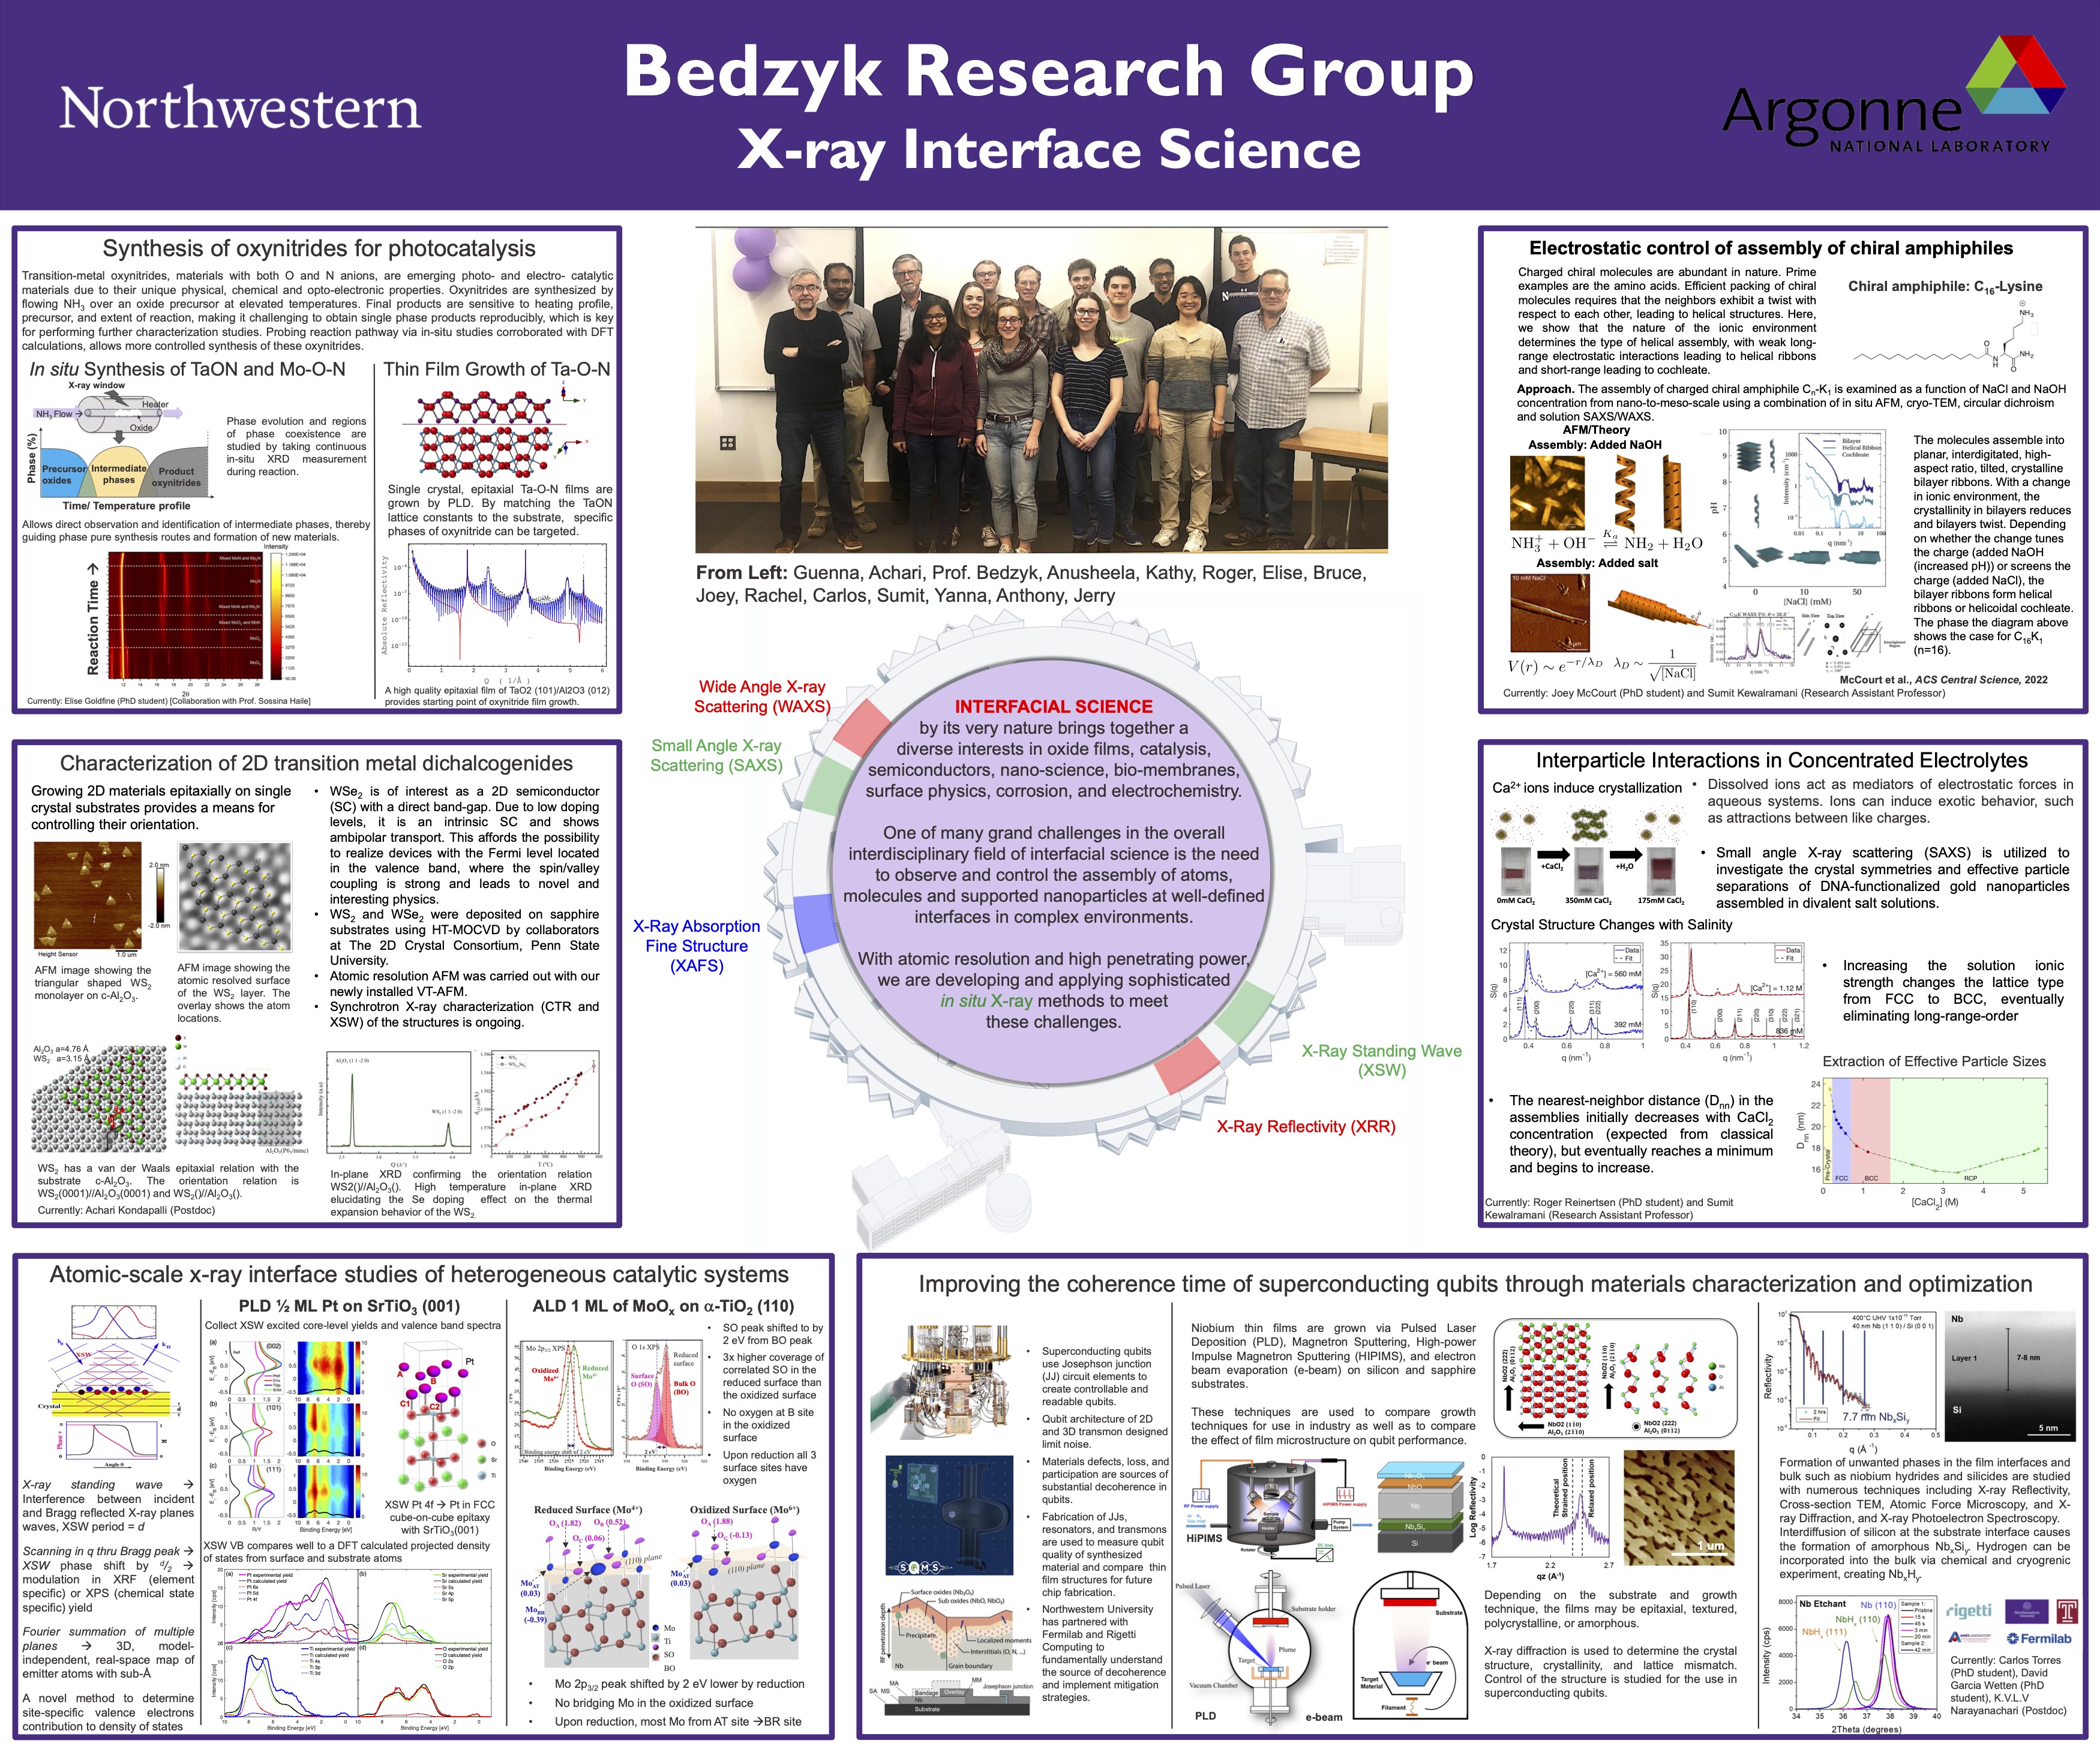 Bedzyk Group Poster from 2022. Interfacial science by its very nature brings together a diverse interests in oxide films, catalysis,semiconductors, nano-science, bio-membranes, surface physics, corrosion, and electrochemistry. One of many grand challenges in the overall interdisciplinary field of interfacial science is the need to observe and control the assembly of atoms, molecules and supported nanoparticles at well-defined interfaces in complex environments. With atomic resolution and high penetrating power, we are developing and applying sophisticated in situ X-ray methods to meet these challenges.